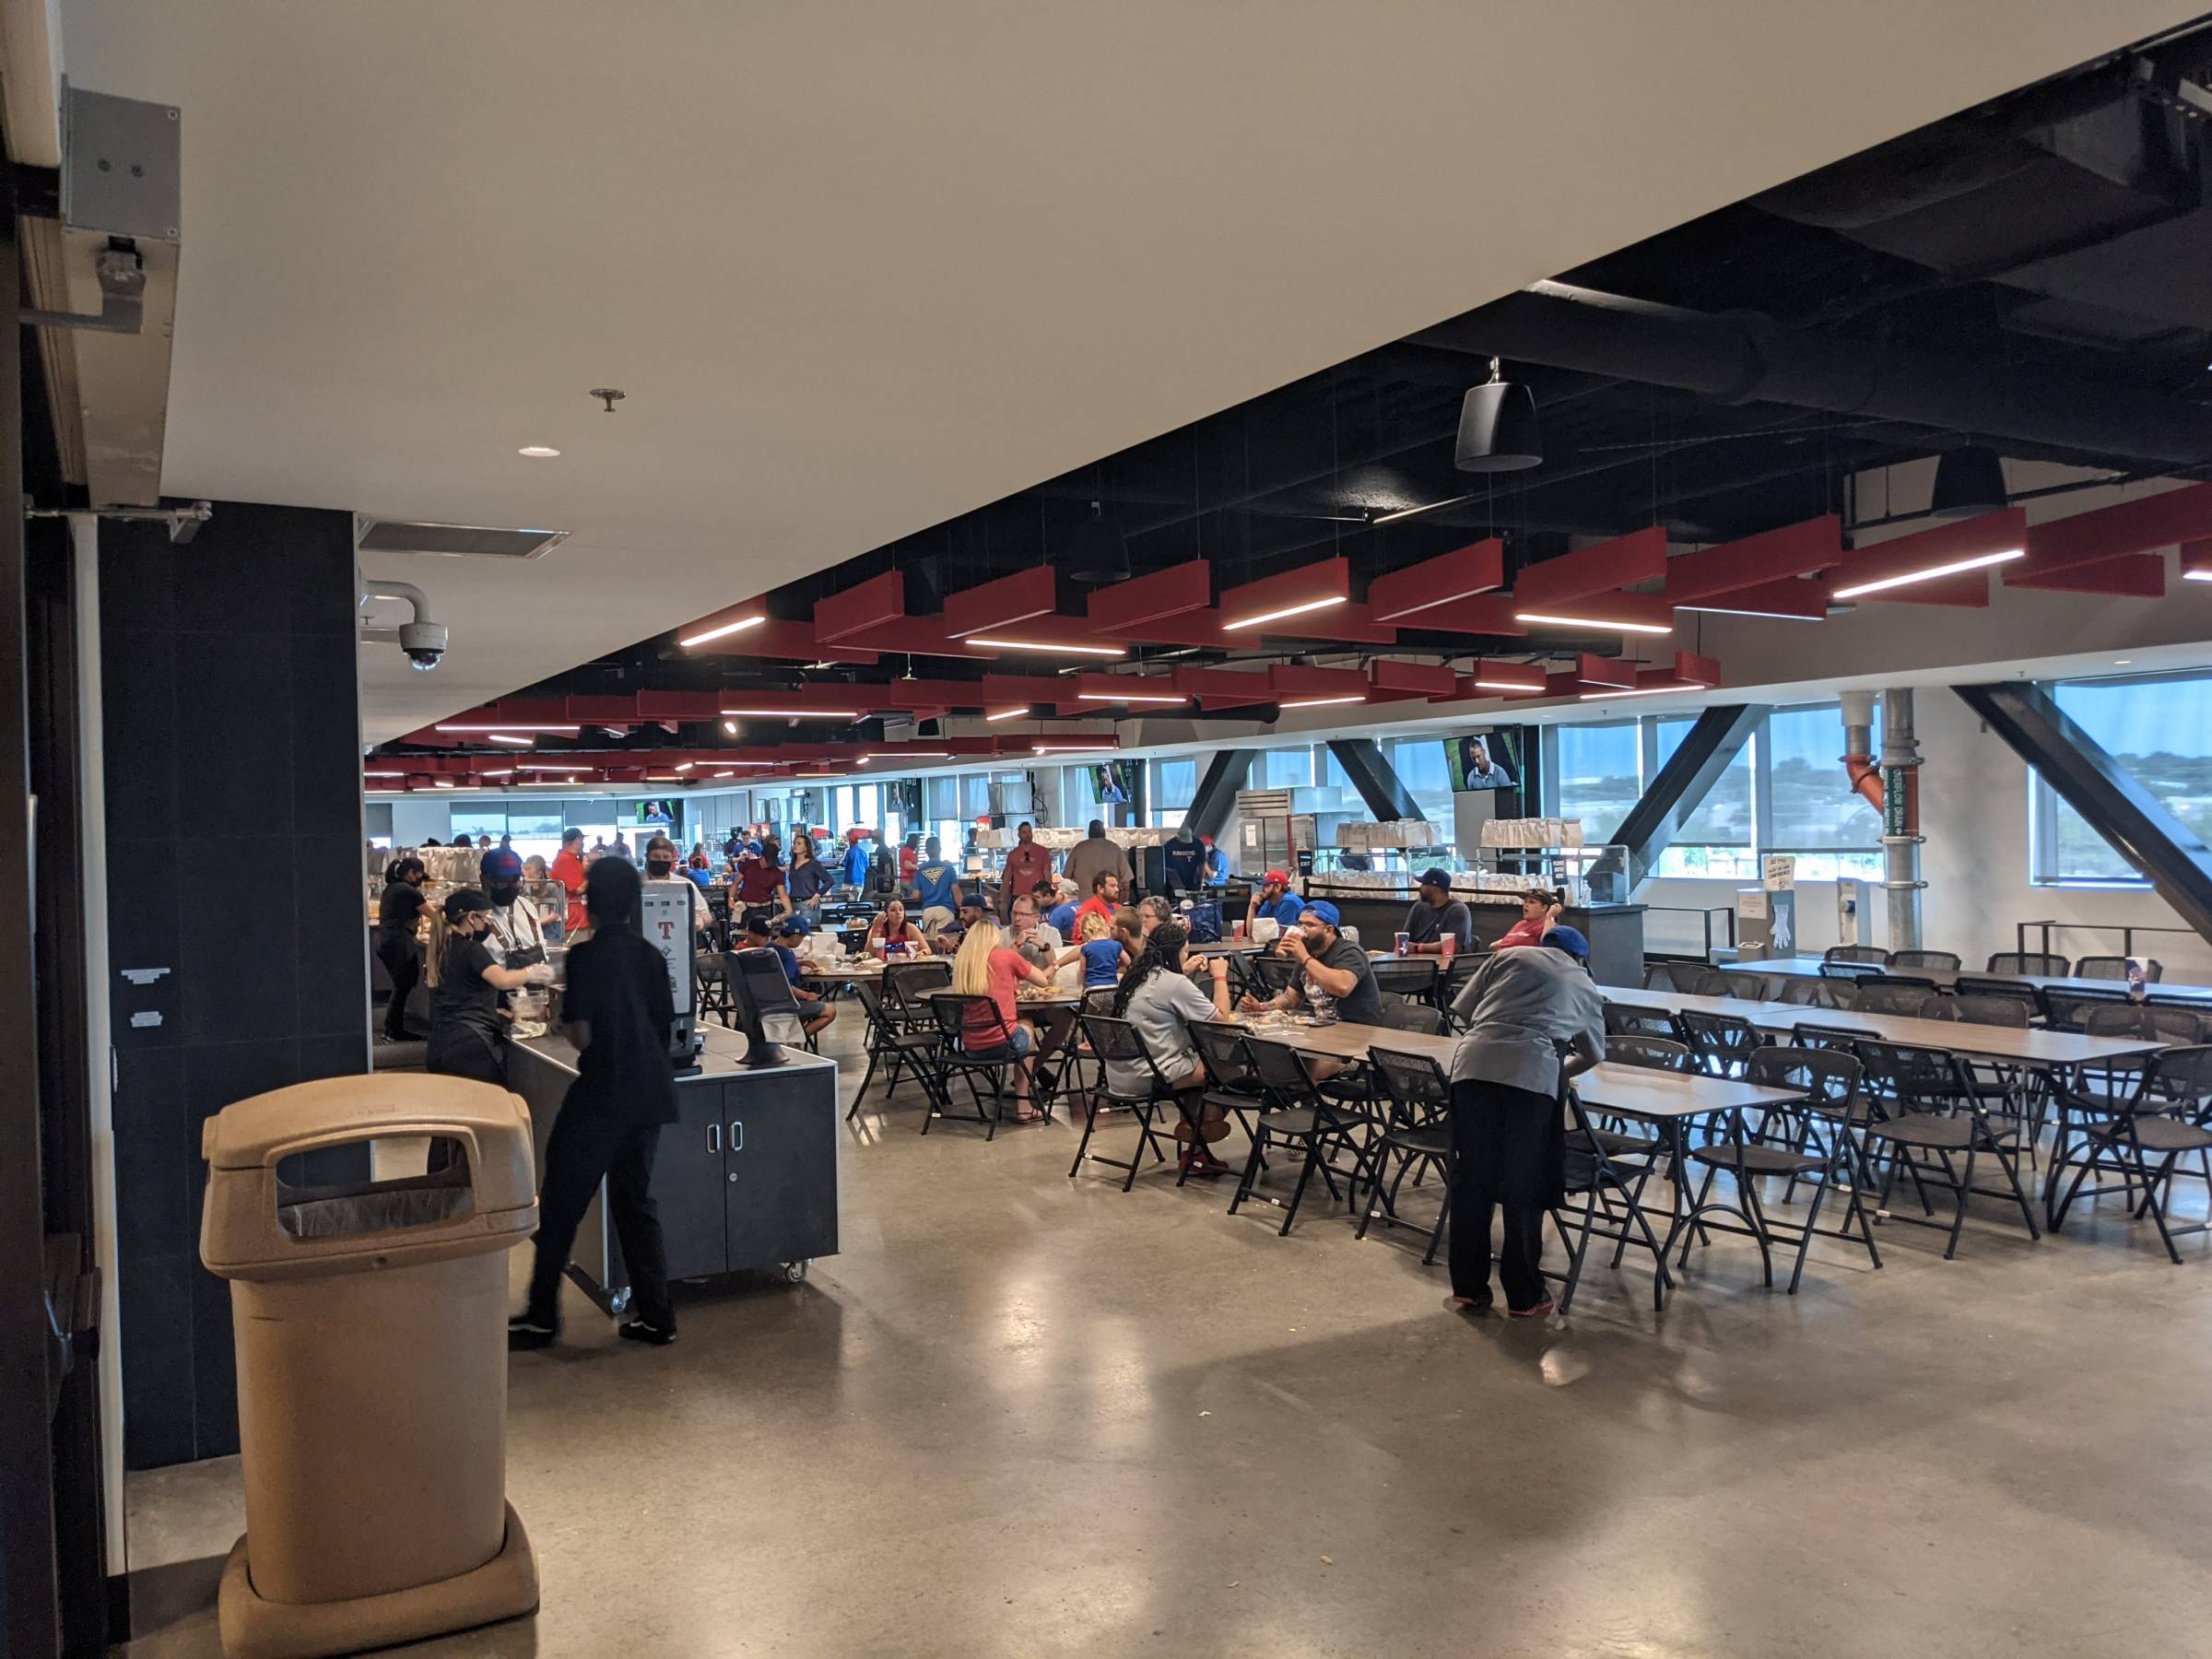 All You Can Eat Seats at Globe Life Field 